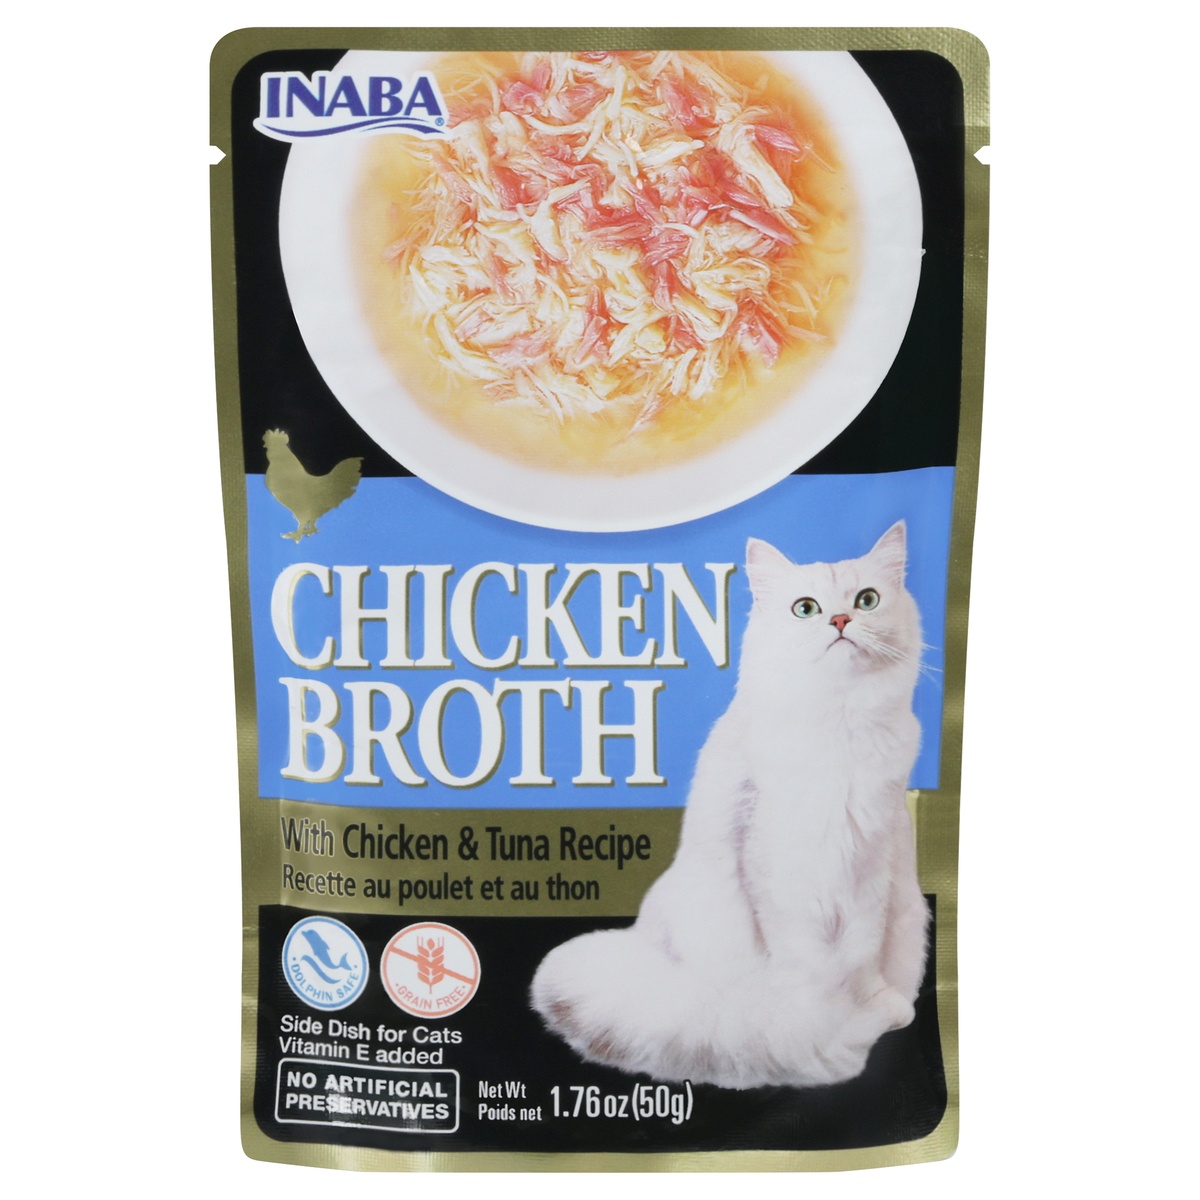 slide 1 of 1, Inaba Chicken Broth with Chicken & Tuna Recipe Side Dish for Cats 1.76 oz, 1.76 oz